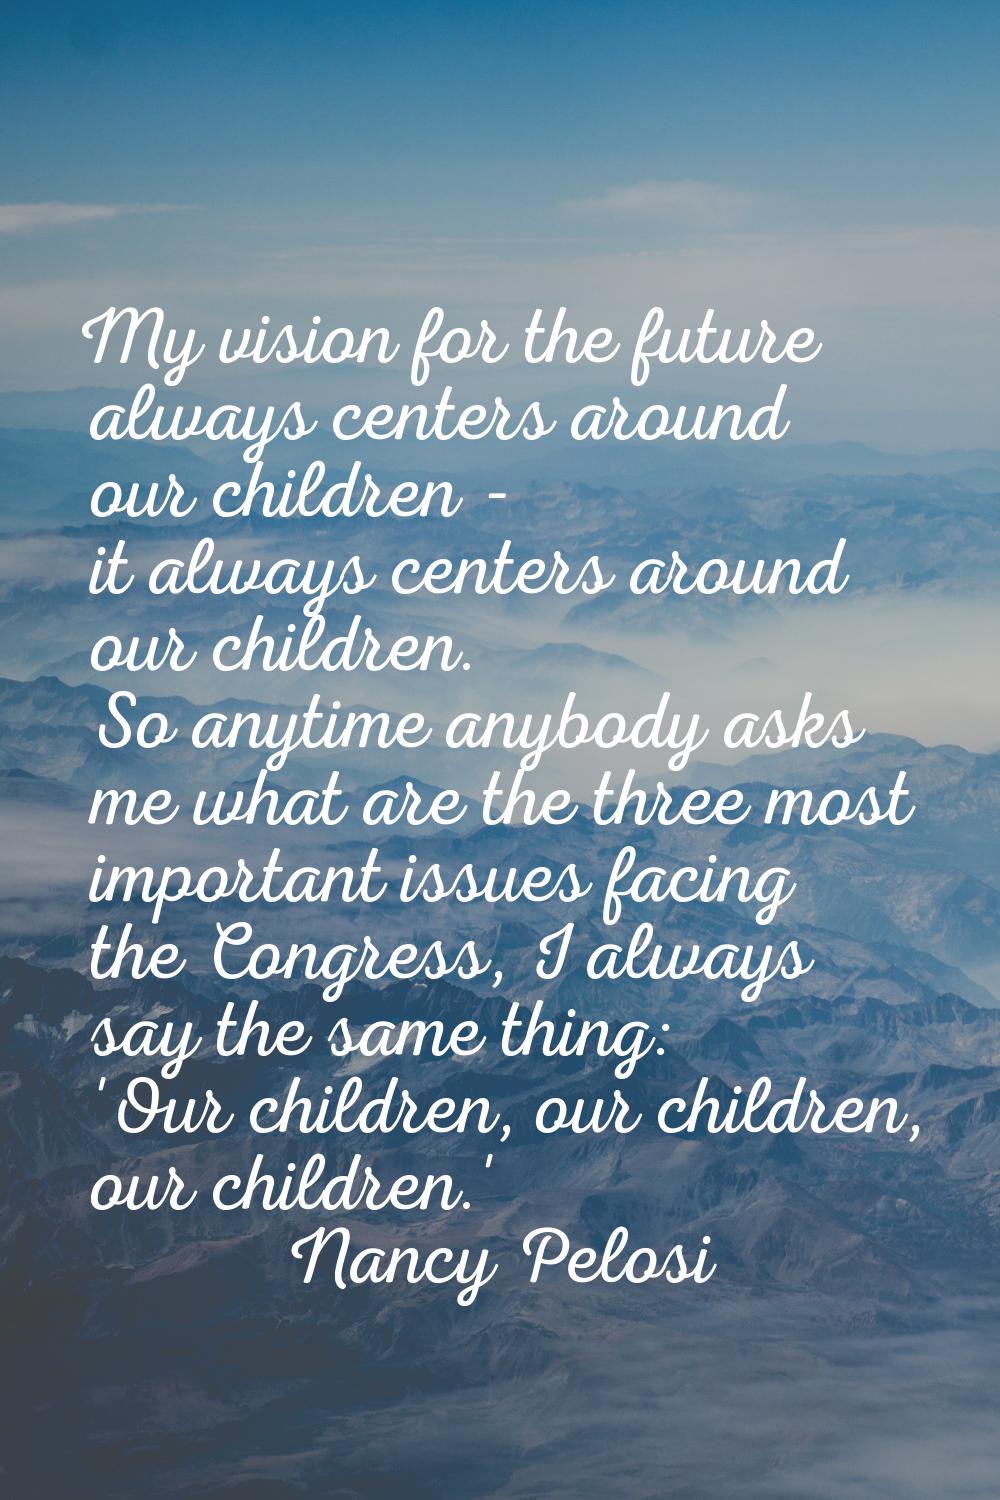 My vision for the future always centers around our children - it always centers around our children